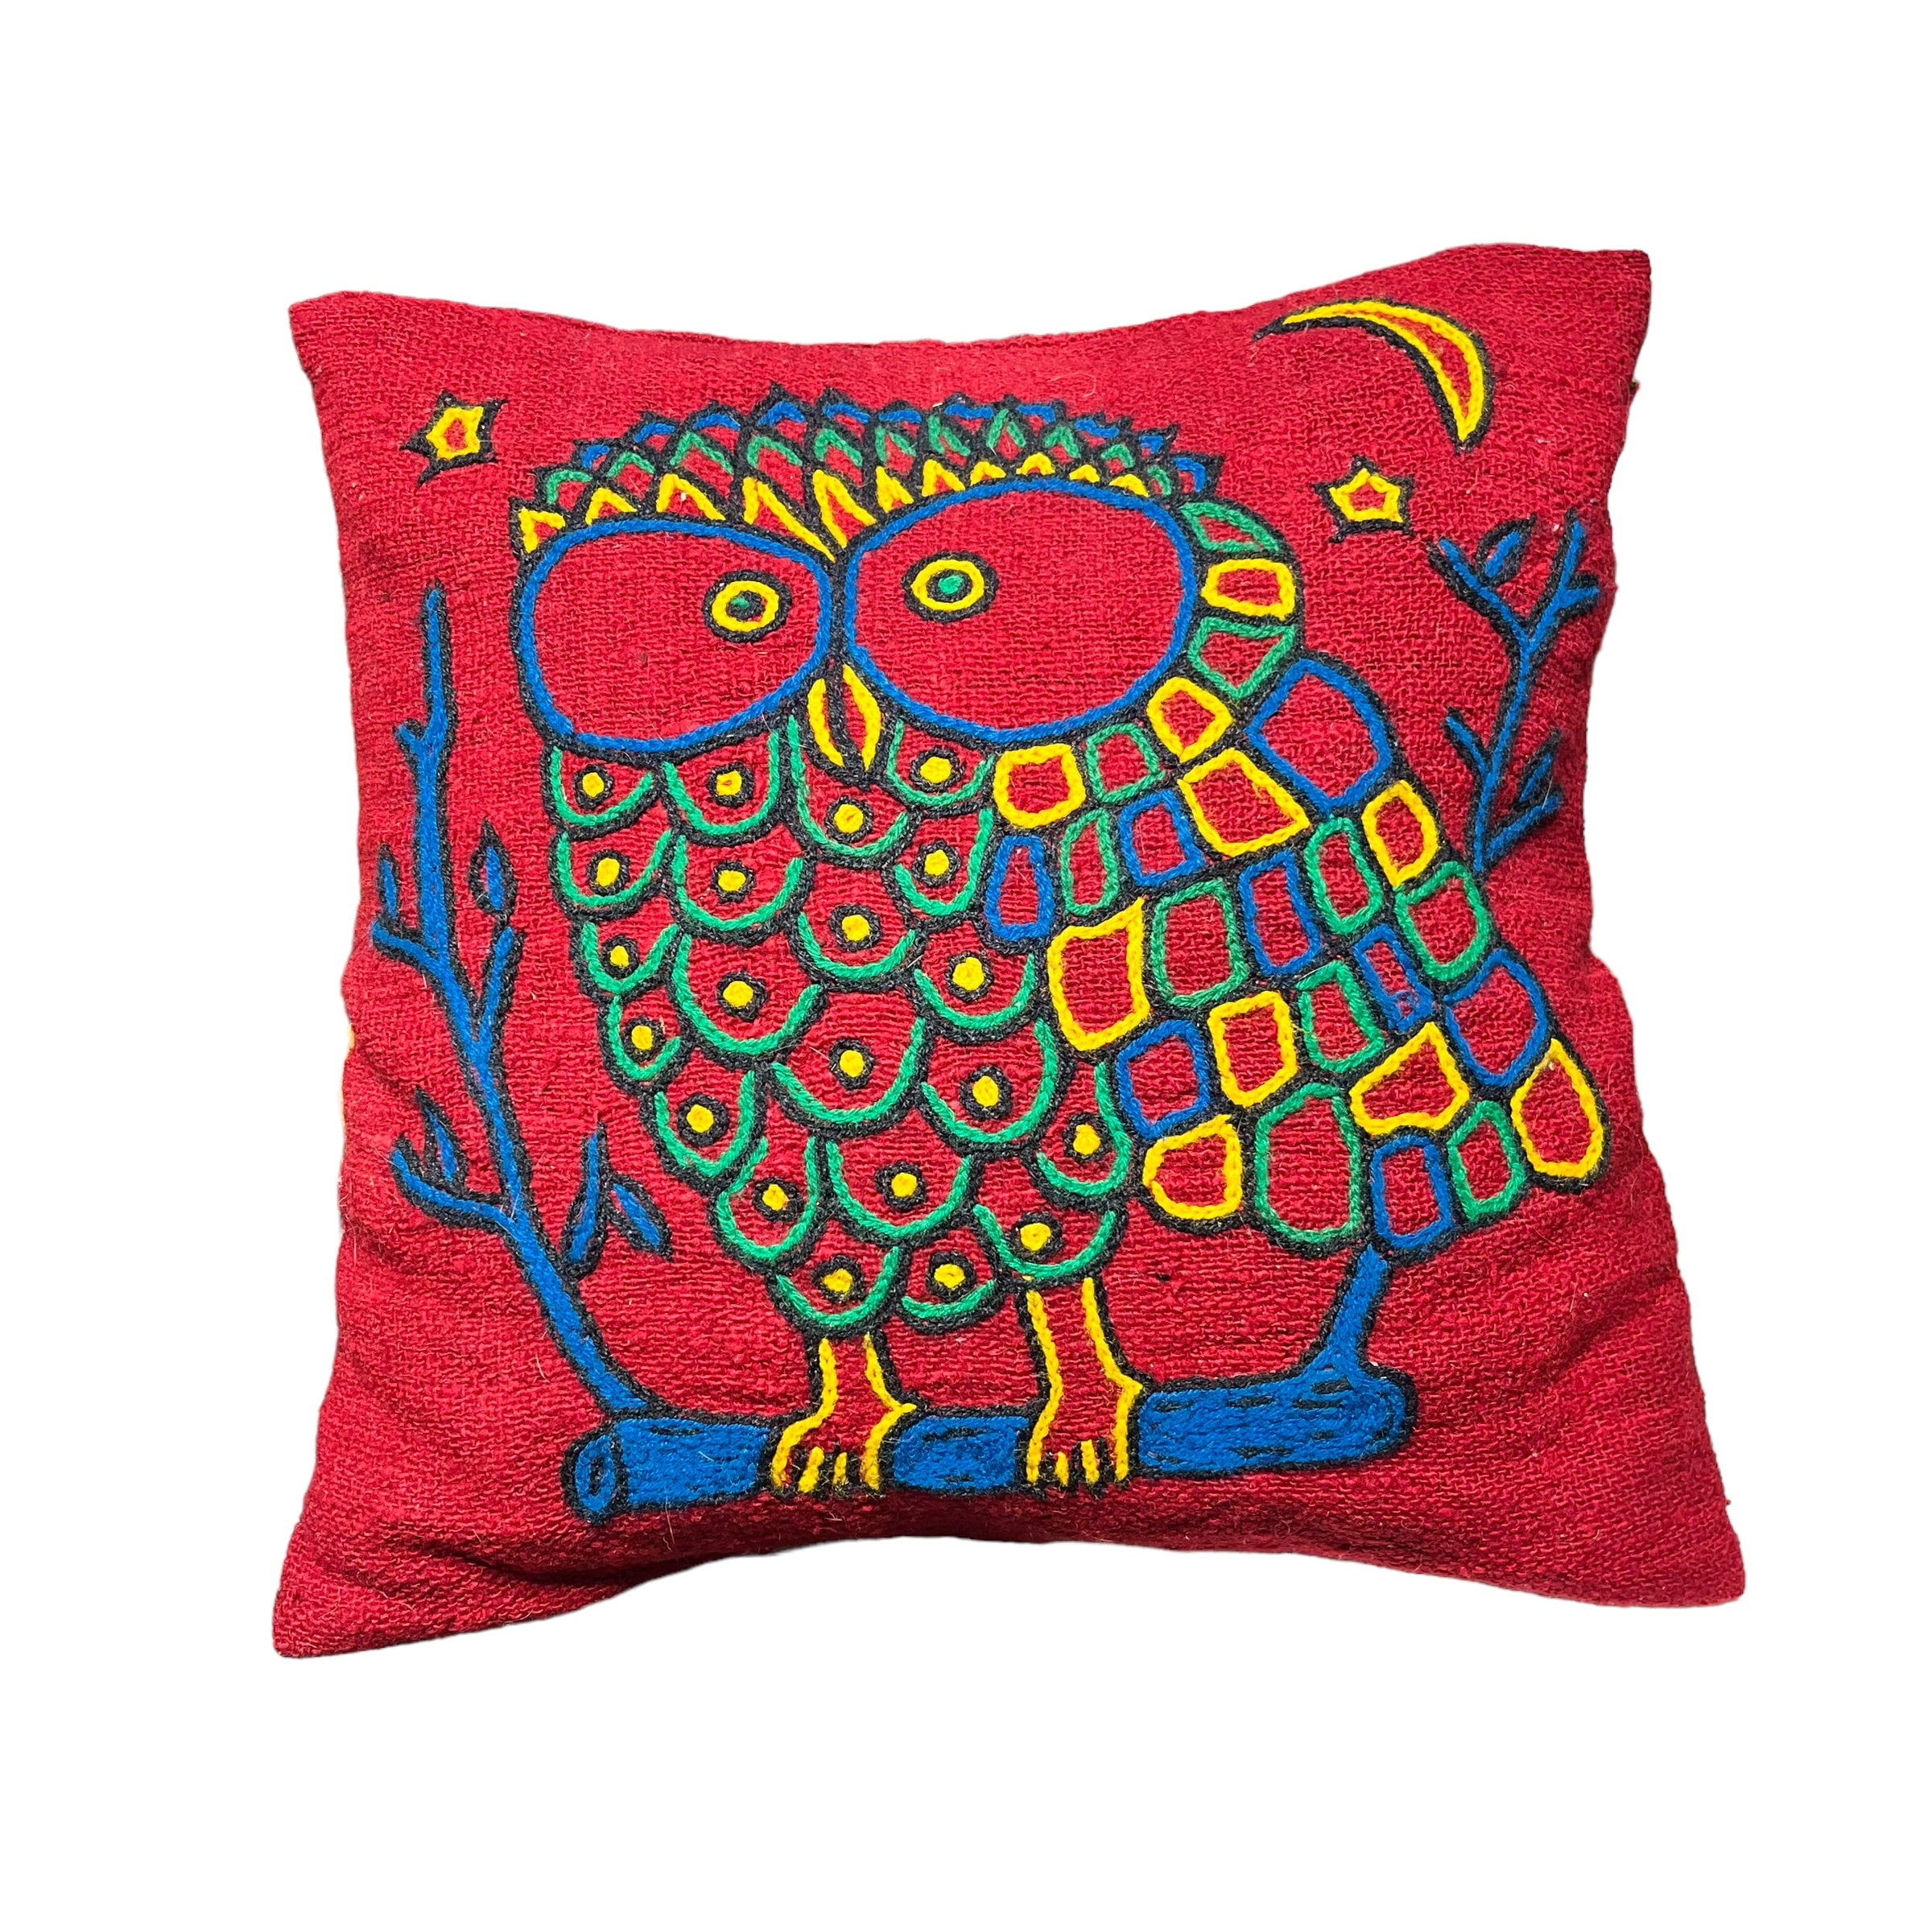 Vintage pillow handmade red owl pillow cover with zipper hand stitched square pillow yarn stitched c